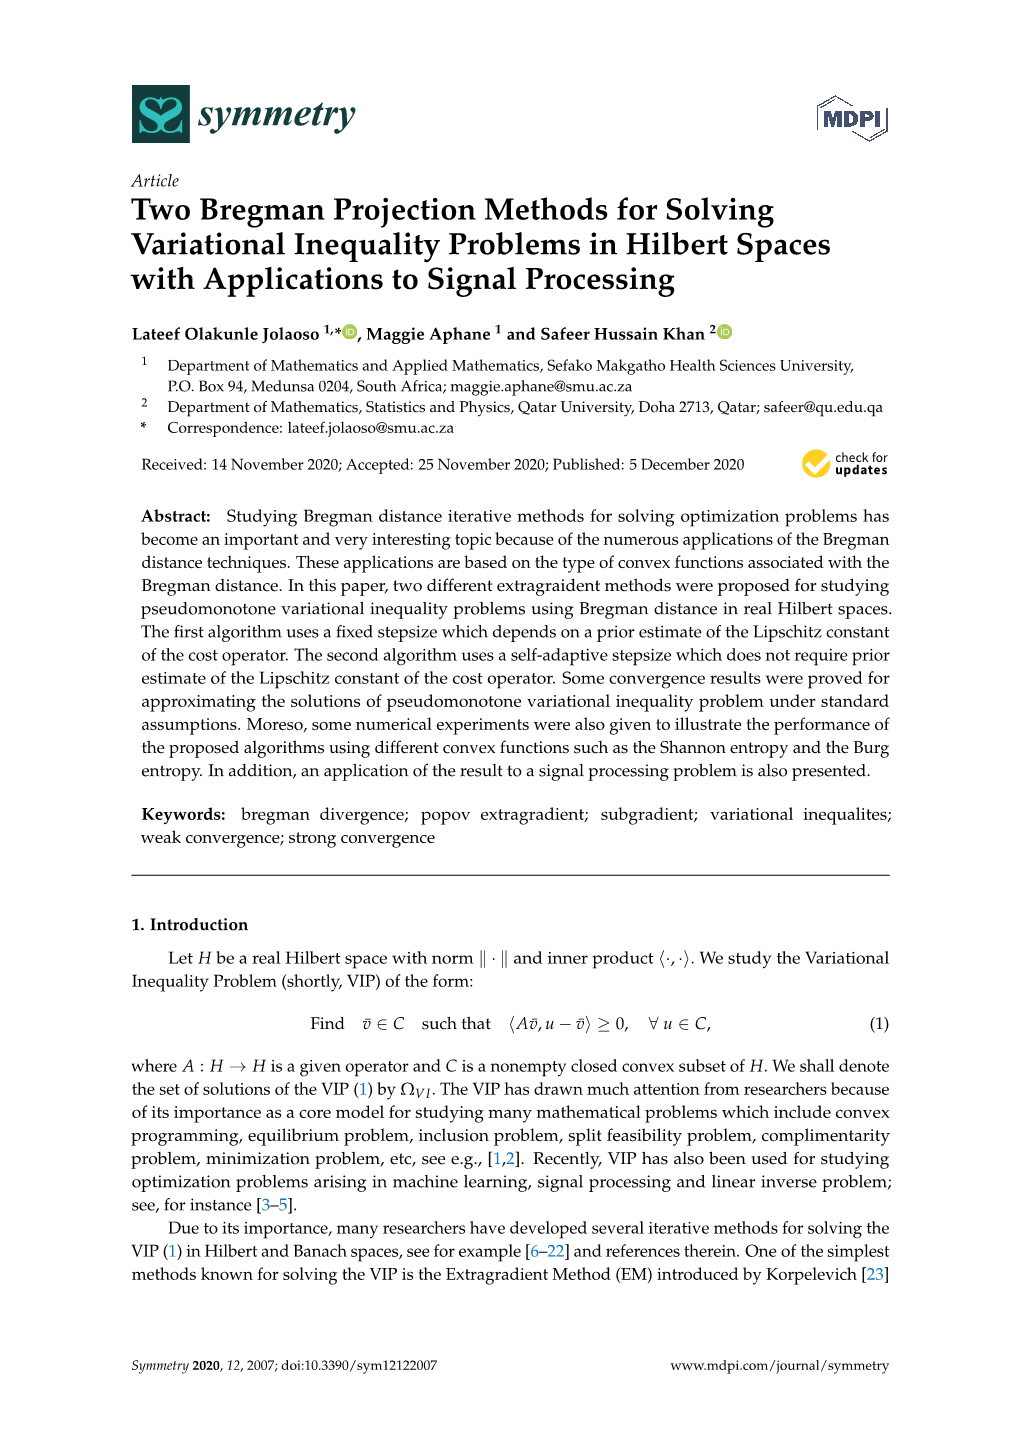 Two Bregman Projection Methods for Solving Variational Inequality Problems in Hilbert Spaces with Applications to Signal Processing